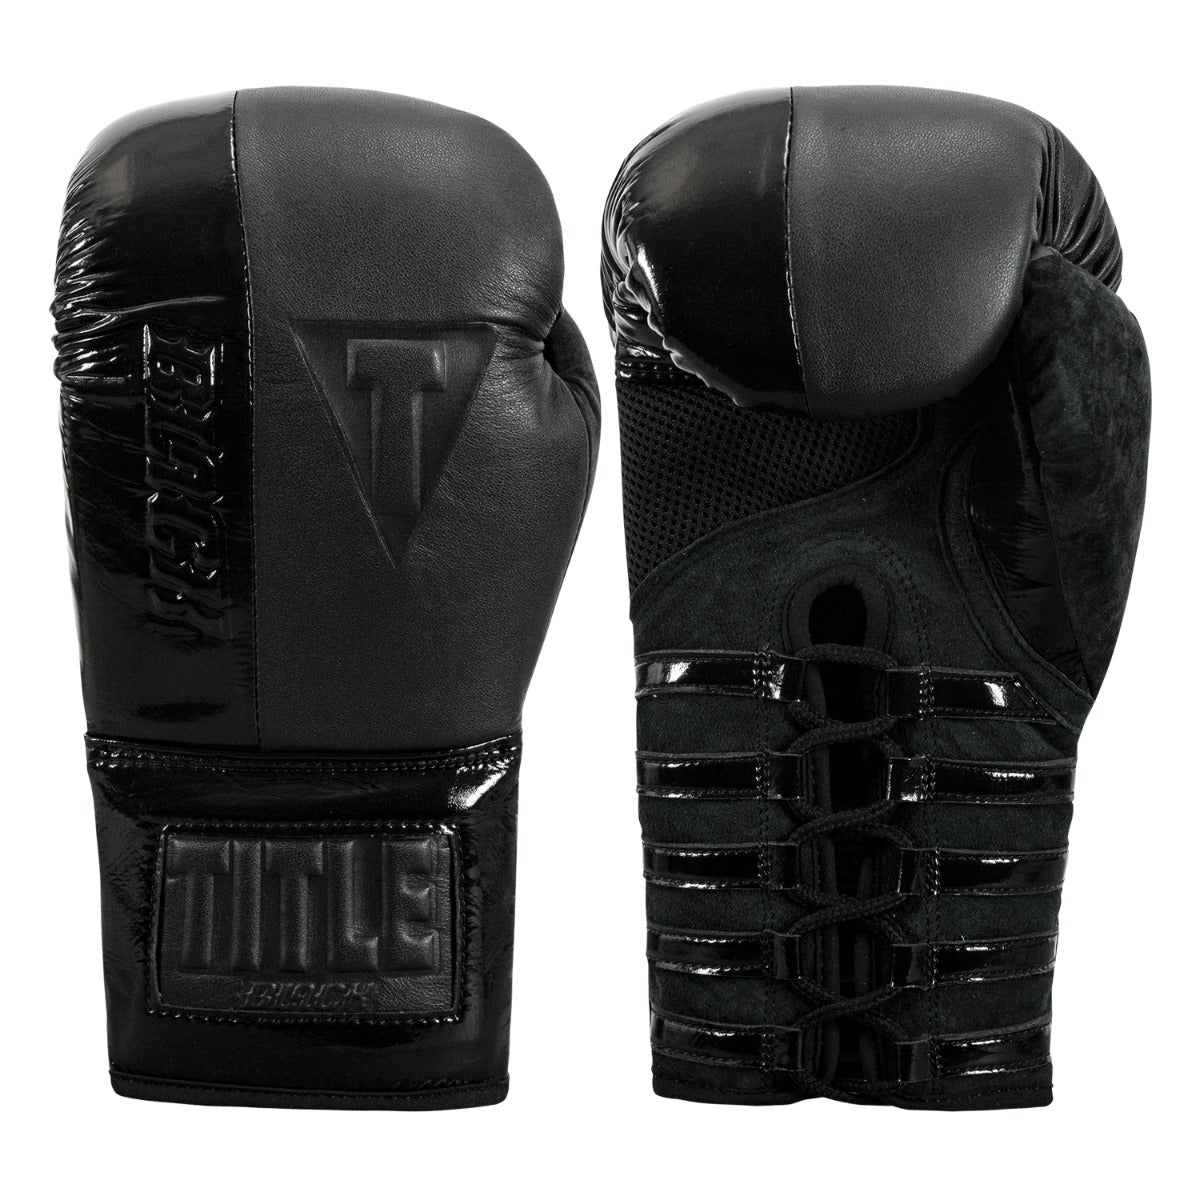 TITLE BLACK Blast Lace Training Gloves | TITLE Boxing Gear